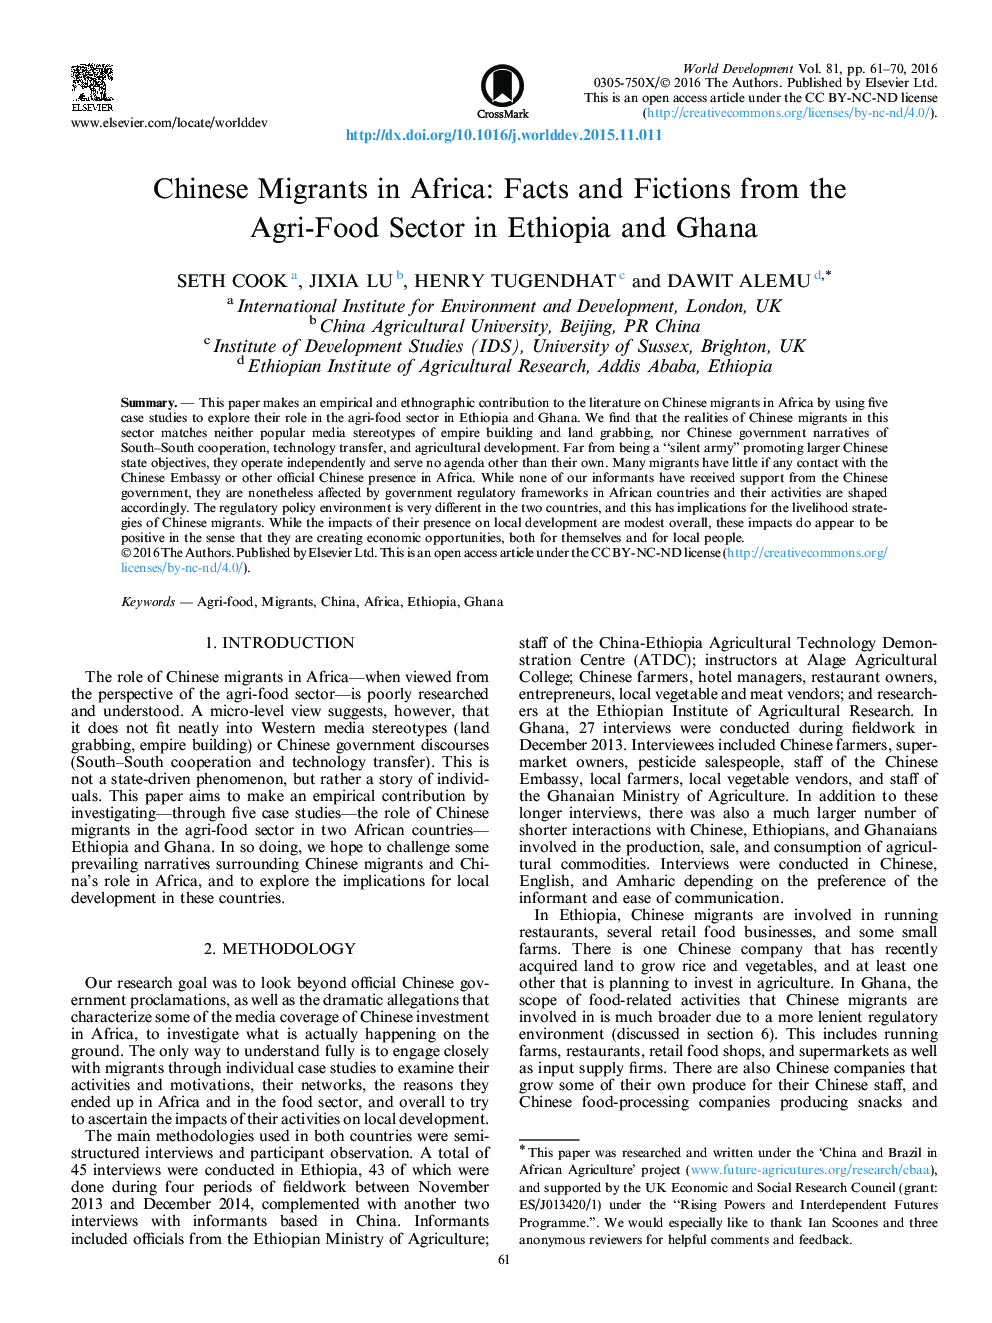 Chinese Migrants in Africa: Facts and Fictions from the Agri-Food Sector in Ethiopia and Ghana